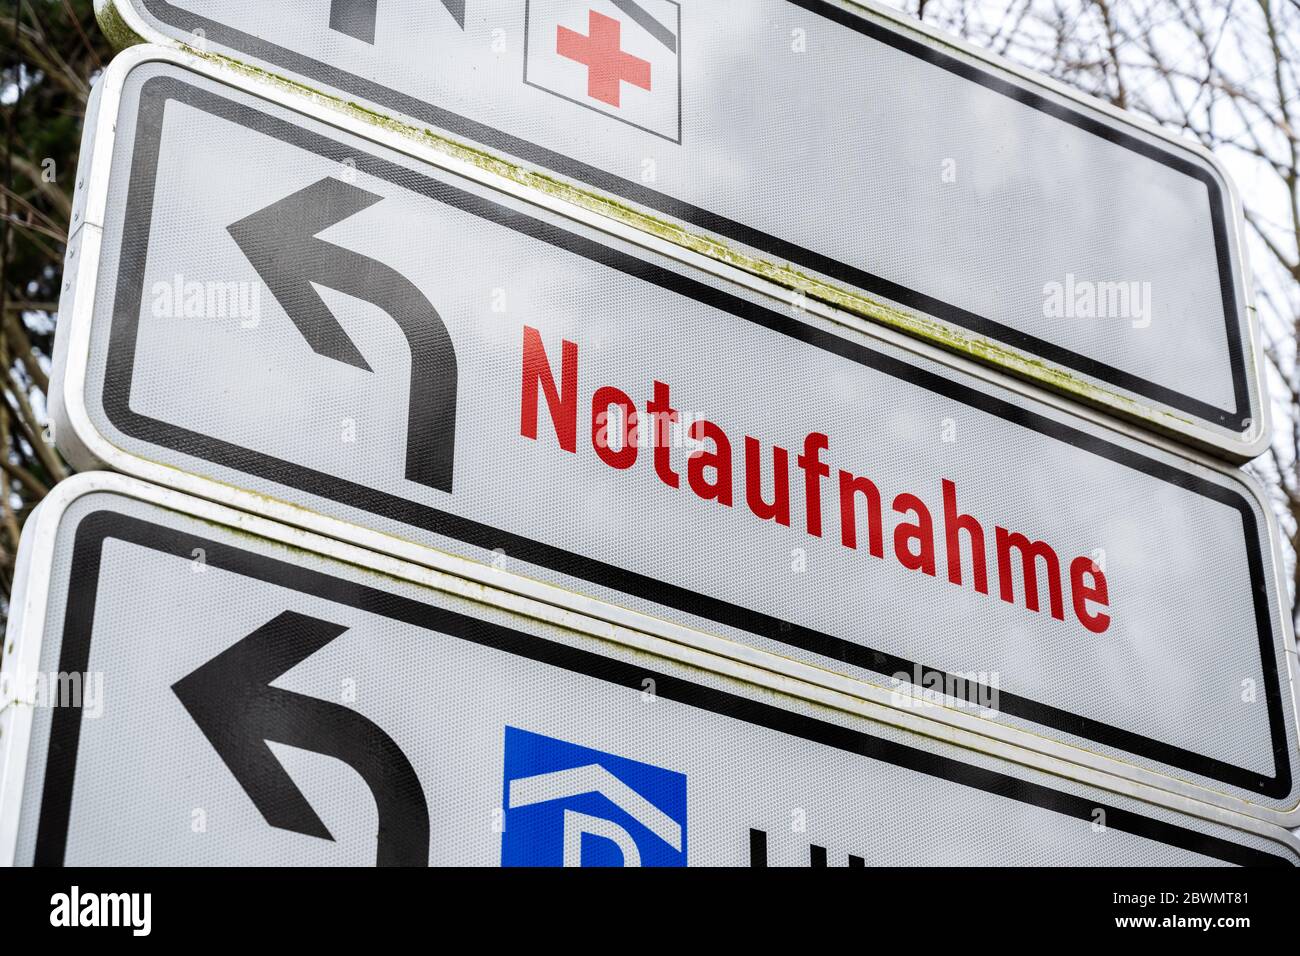 Direction sign shows the Red Cross and German text Notaufnahme, meaning emergency department, at the driveway to a large hospital Stock Photo